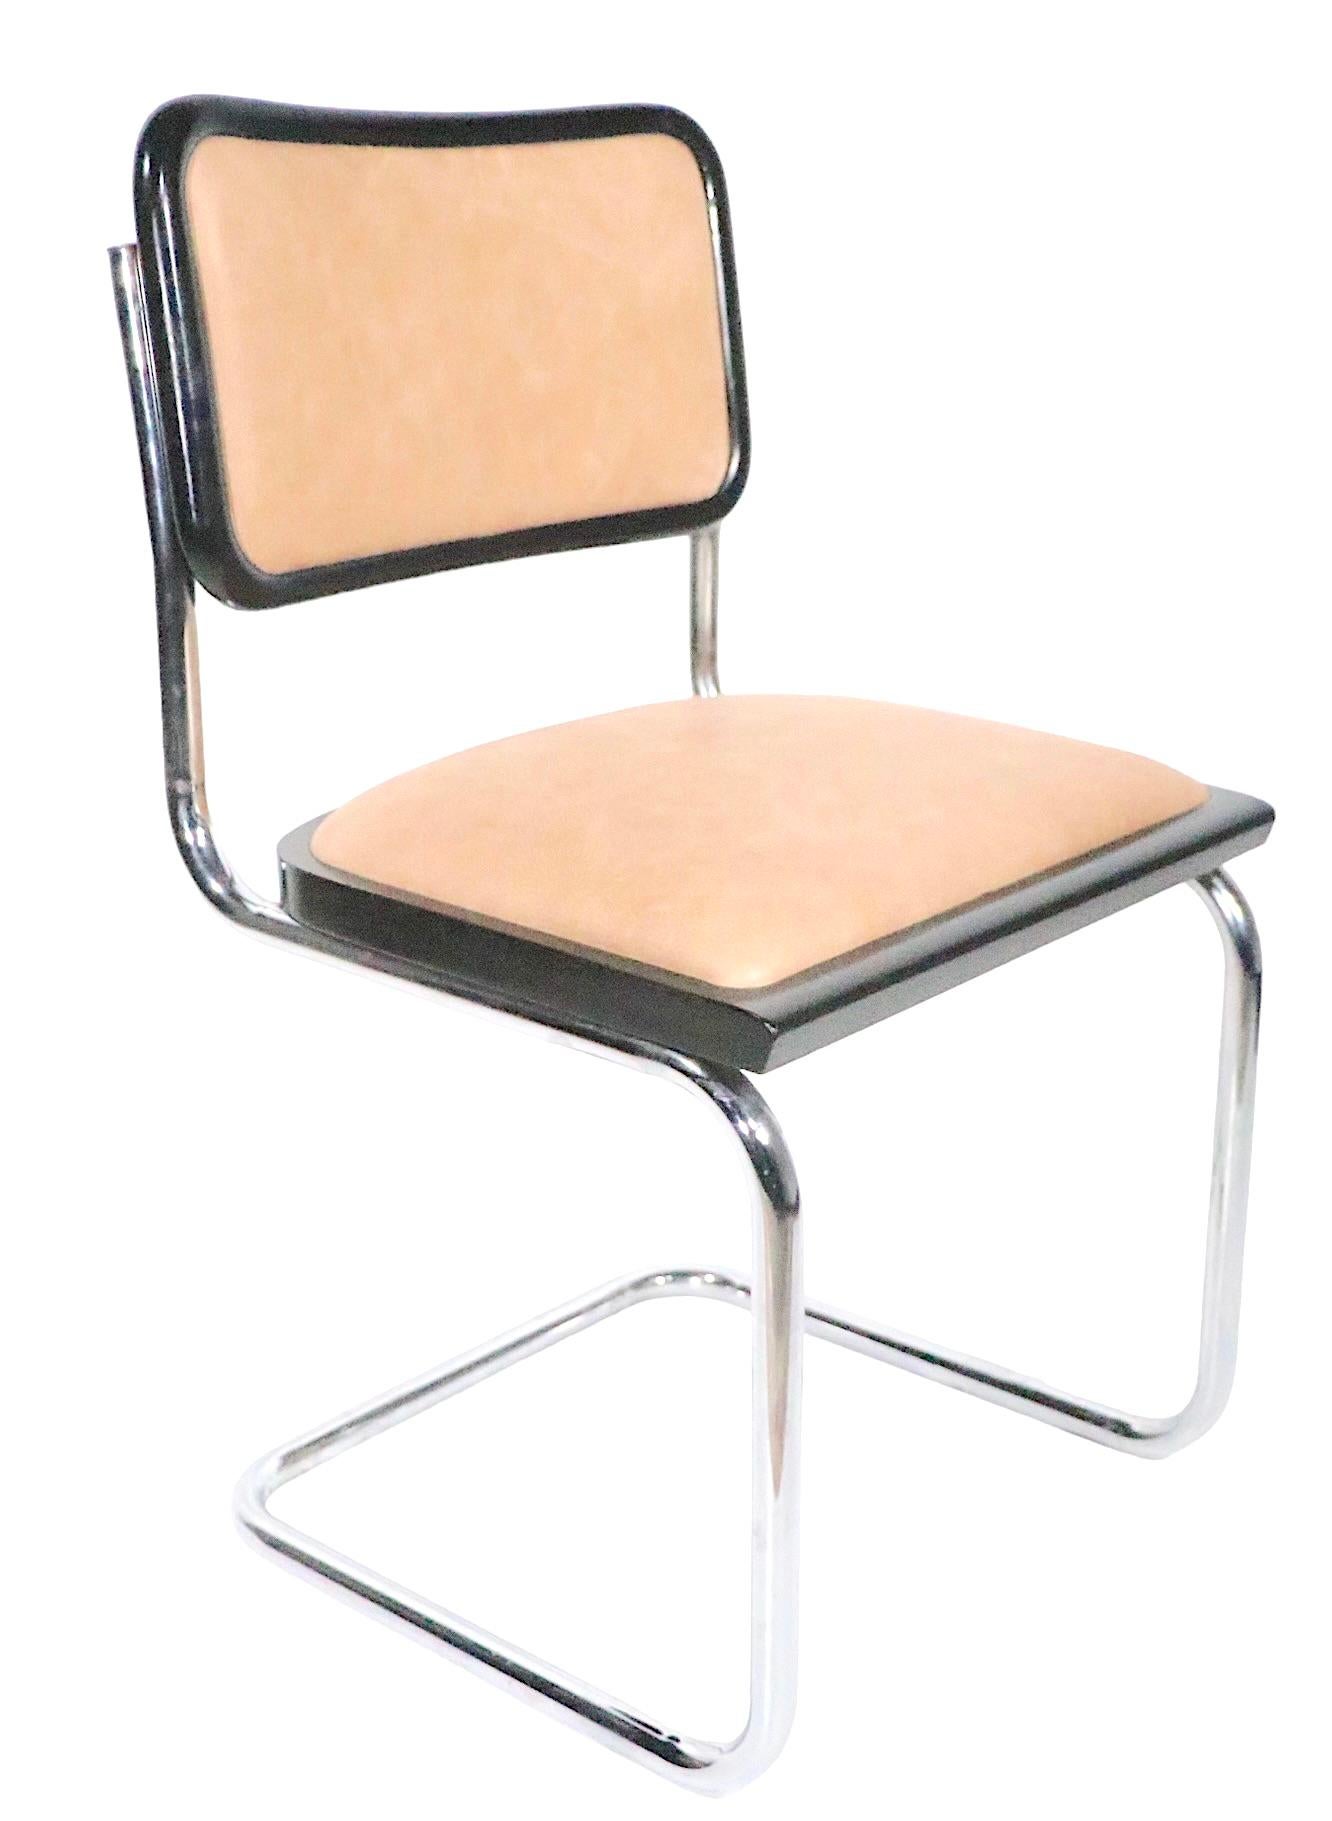 Exceptional set of four Cesca chairs, originally designed by Marcel Breuer circa 1920’s, these are later vintage examples, made in Italy circa 1970’s.
 The chairs are newly reupholstered in tan leather. All are in clean, ready to use condition,